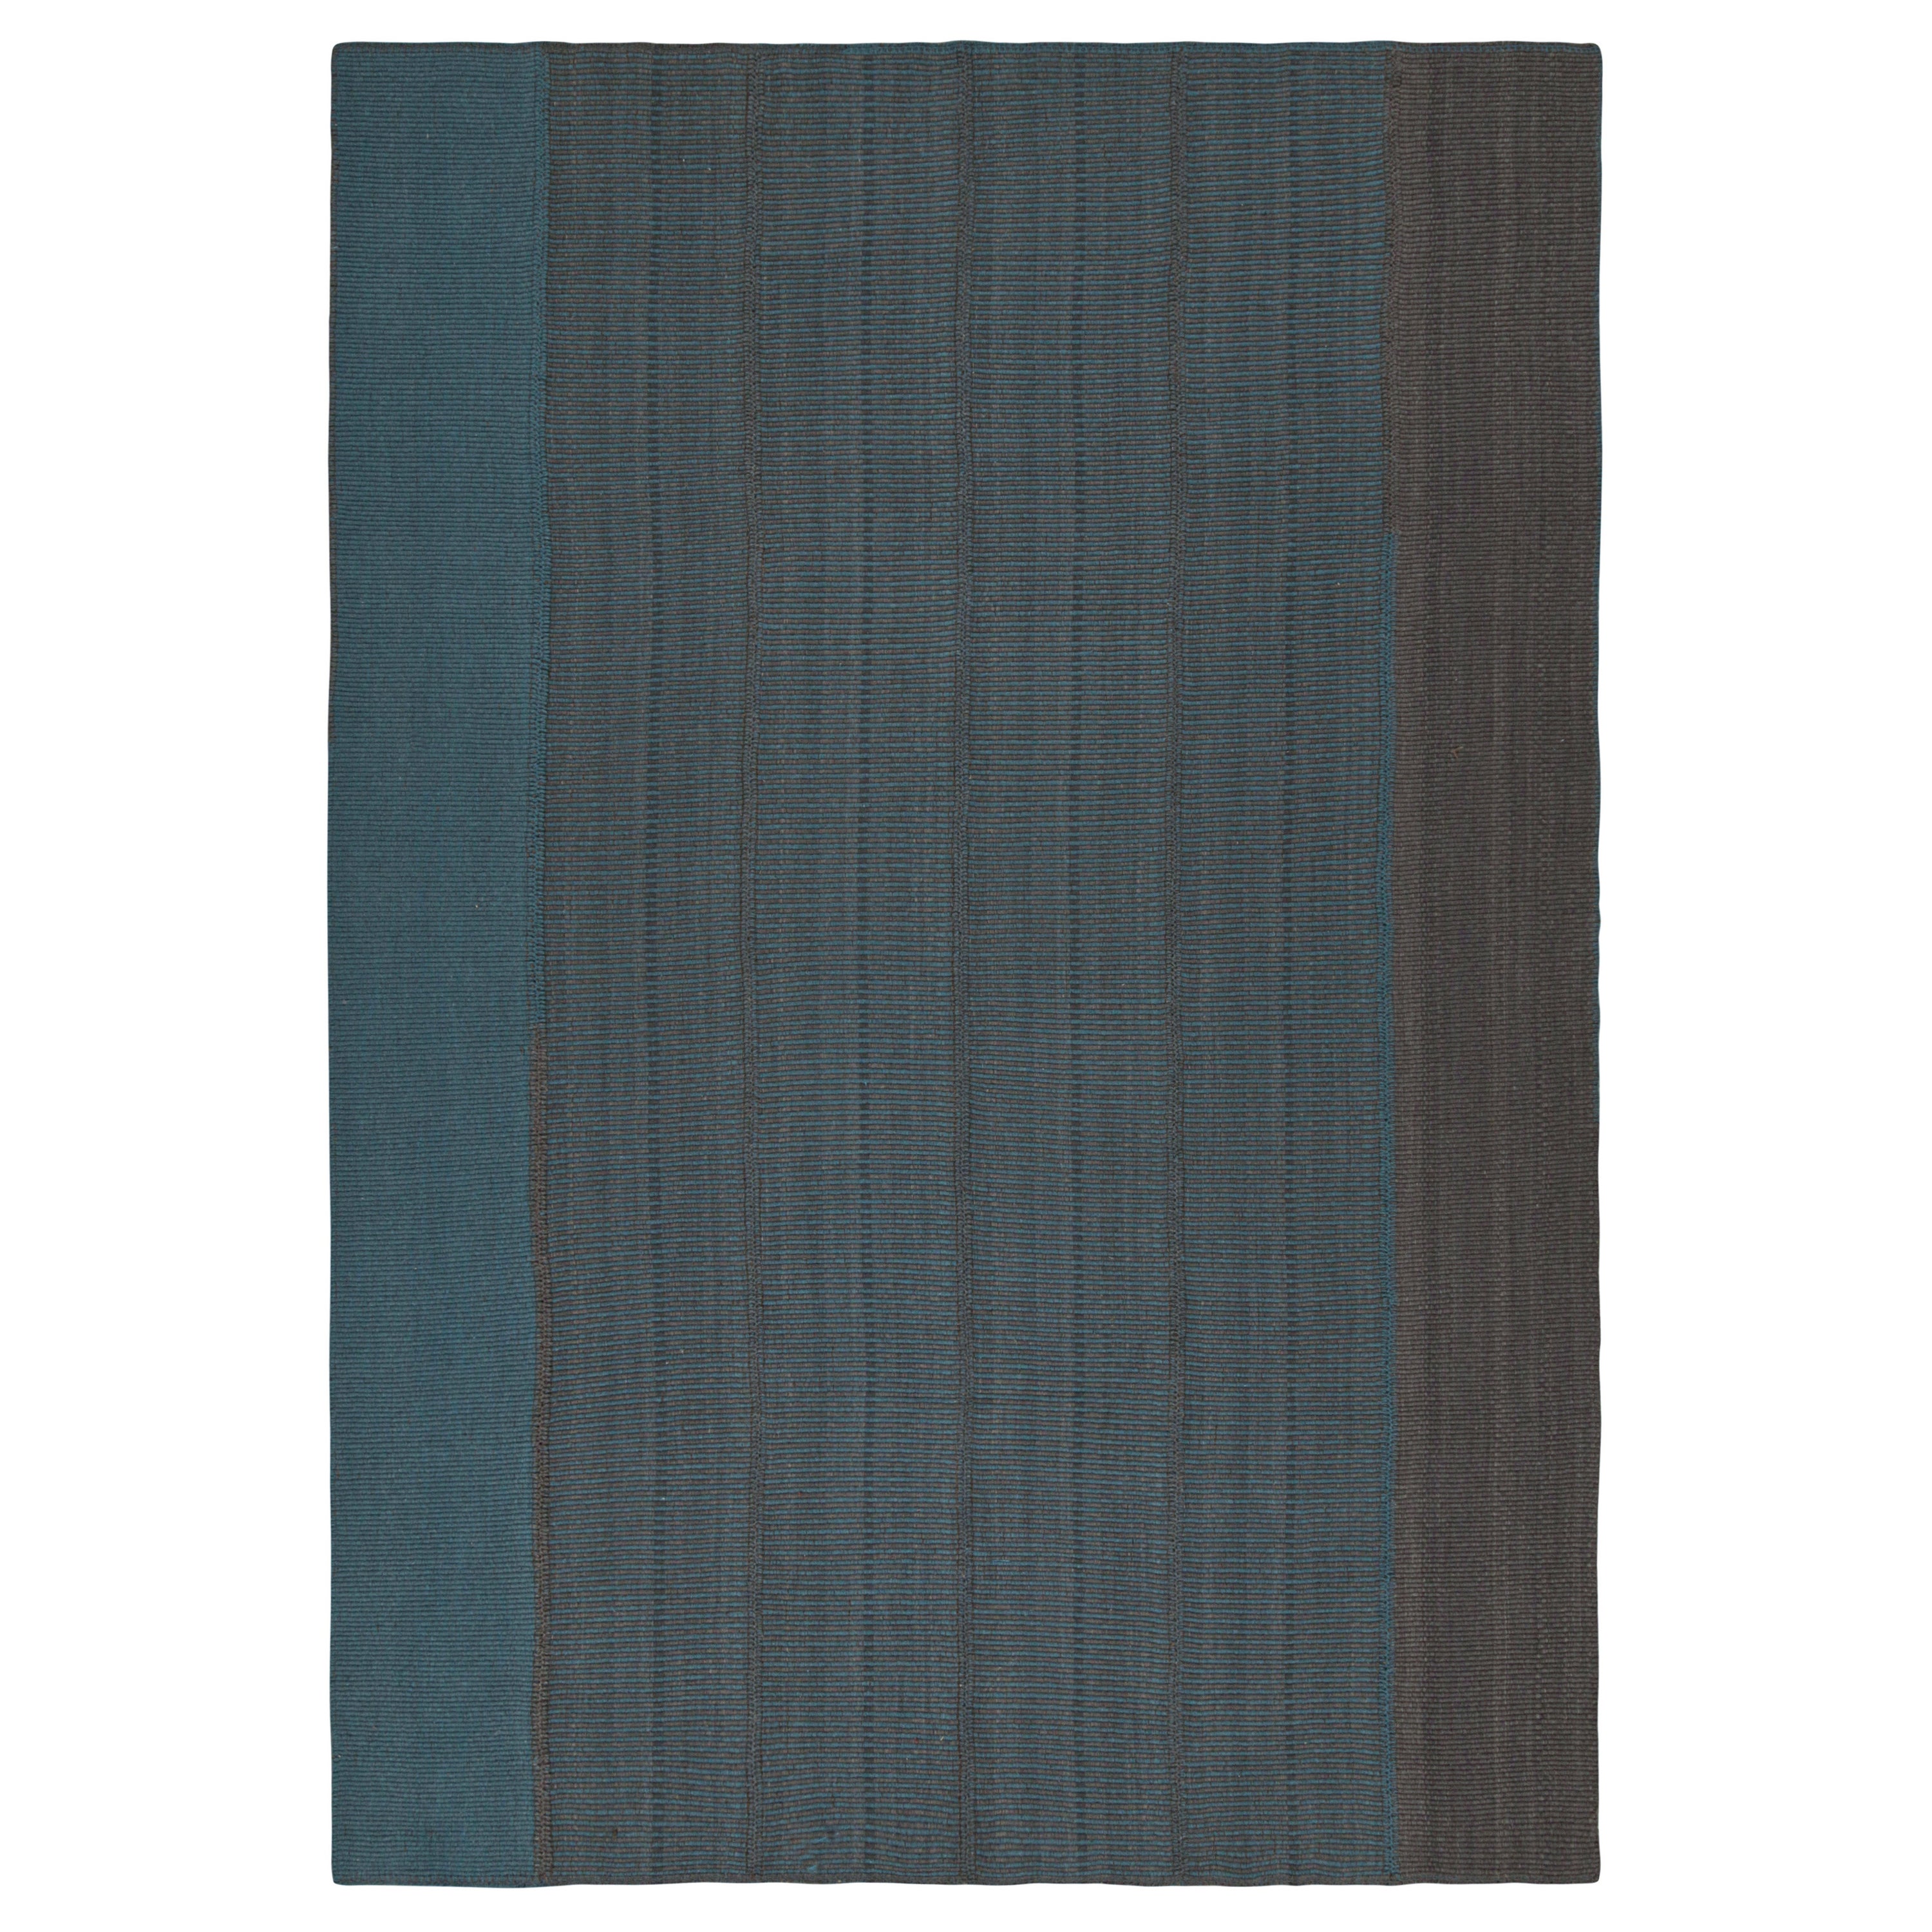 Rug & Kilim’s Contemporary Kilim in Blue with Gray Stripes and Brown Accents